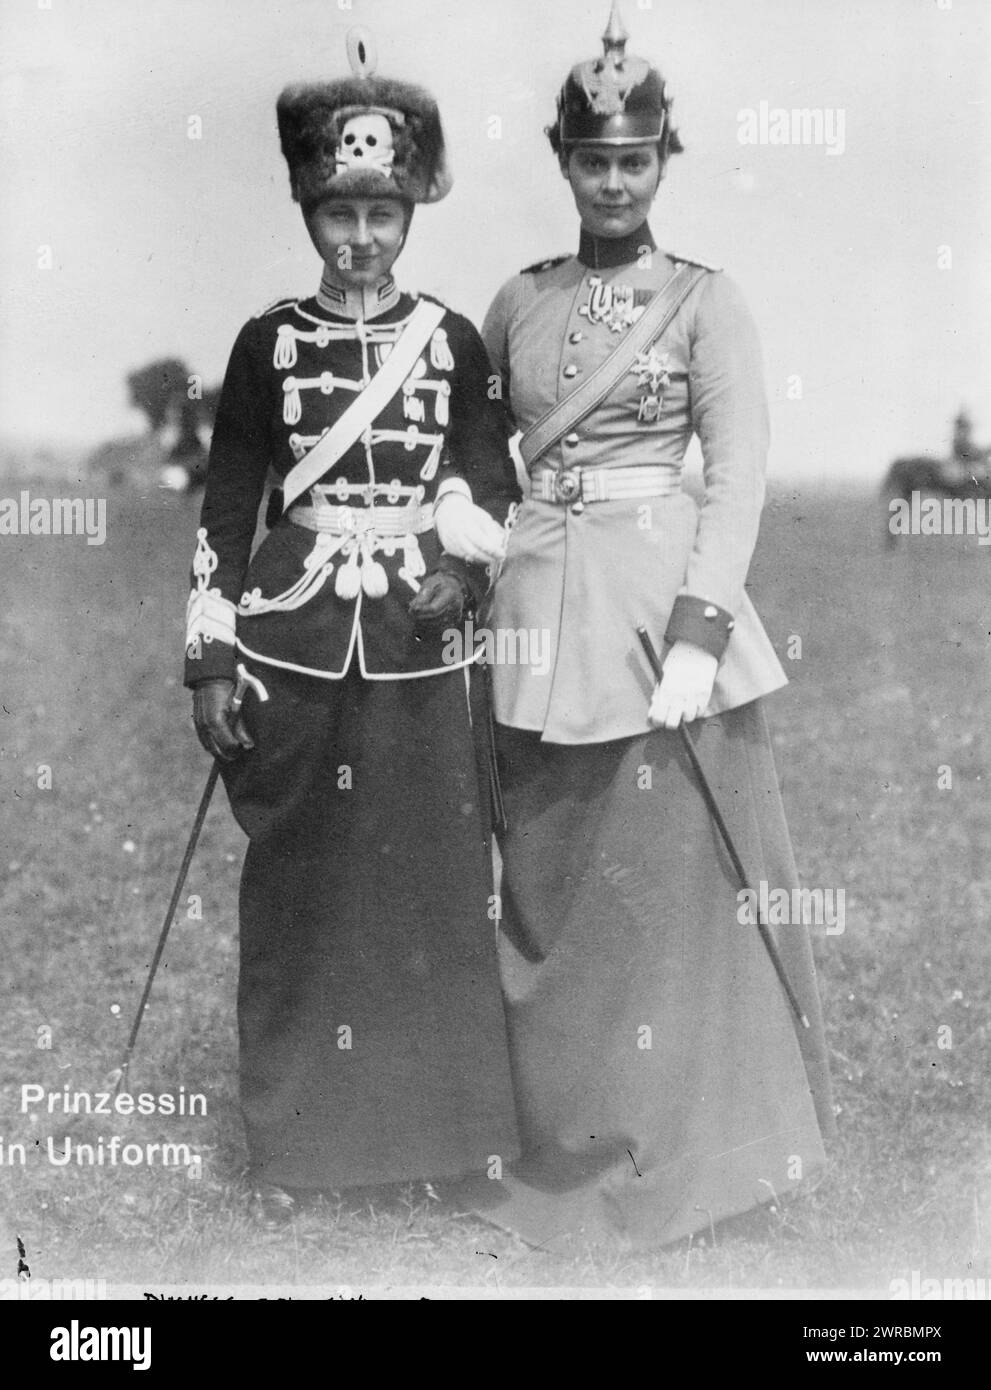 Duchess Brunswick & Crown Princess Cecilie, Photograph shows Crown Princess Cecilie Auguste Marie of Mecklenburg-Schwerin (1886-1954), wife of German Crown Prince William (right) wearing her Dragoon regiment uniform and Victoria Louise of Prussia (the Duchess of Brunswick) in the uniform of her personal Hussar Regiment., between ca. 1910 and ca. 1915, Glass negatives, 1 negative: glass Stock Photo